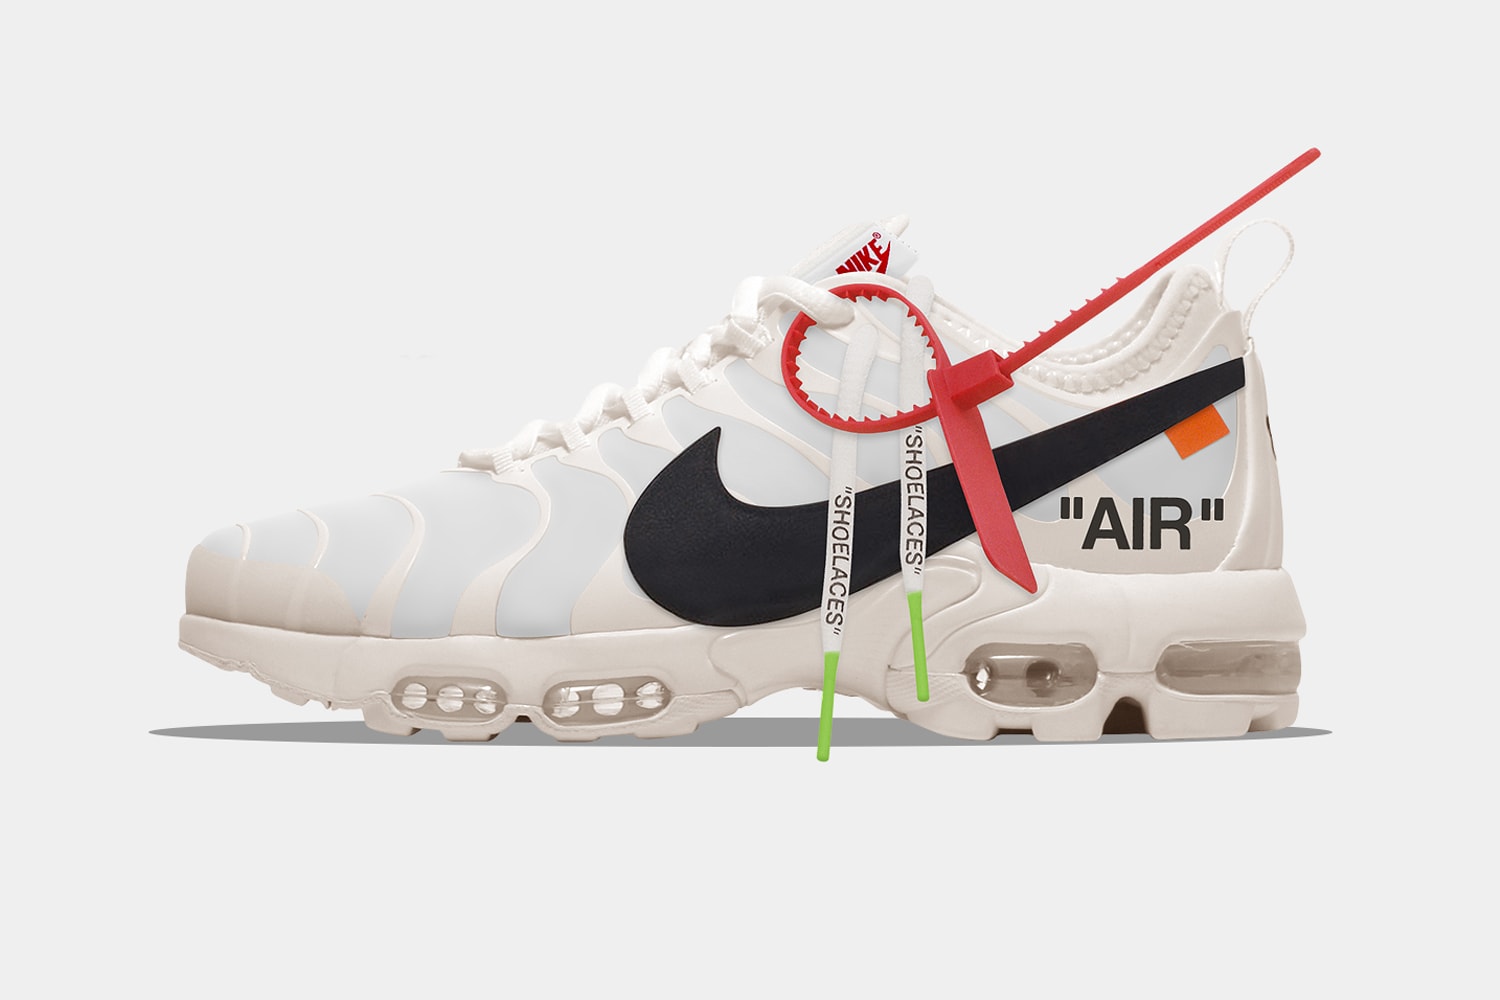 Off-White™ Nike Virgil Abloh Air More Uptempo Nike Air Max Plus Concept The Golden Shape